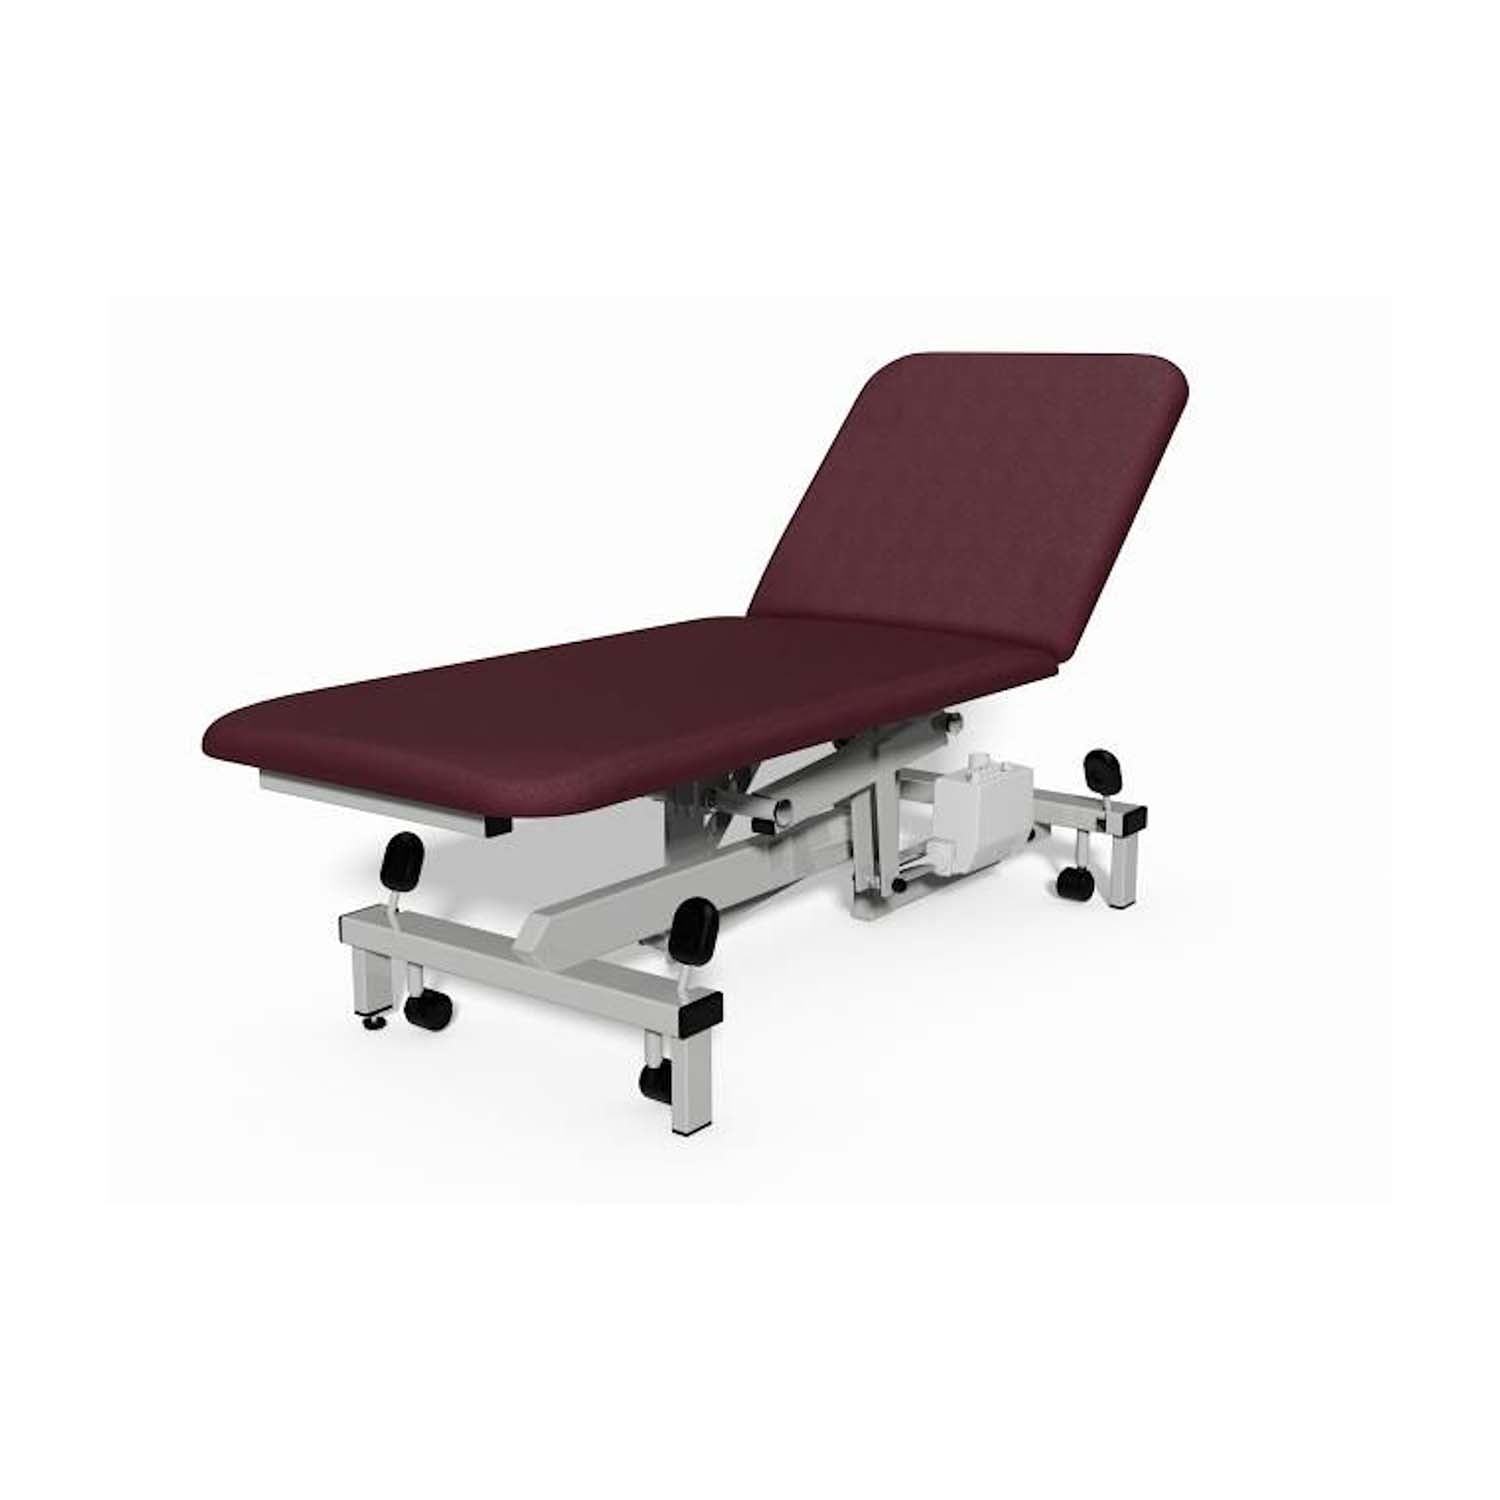 Plinth 2000 Model 502 Examination Couch | Electric | Mulled Wine